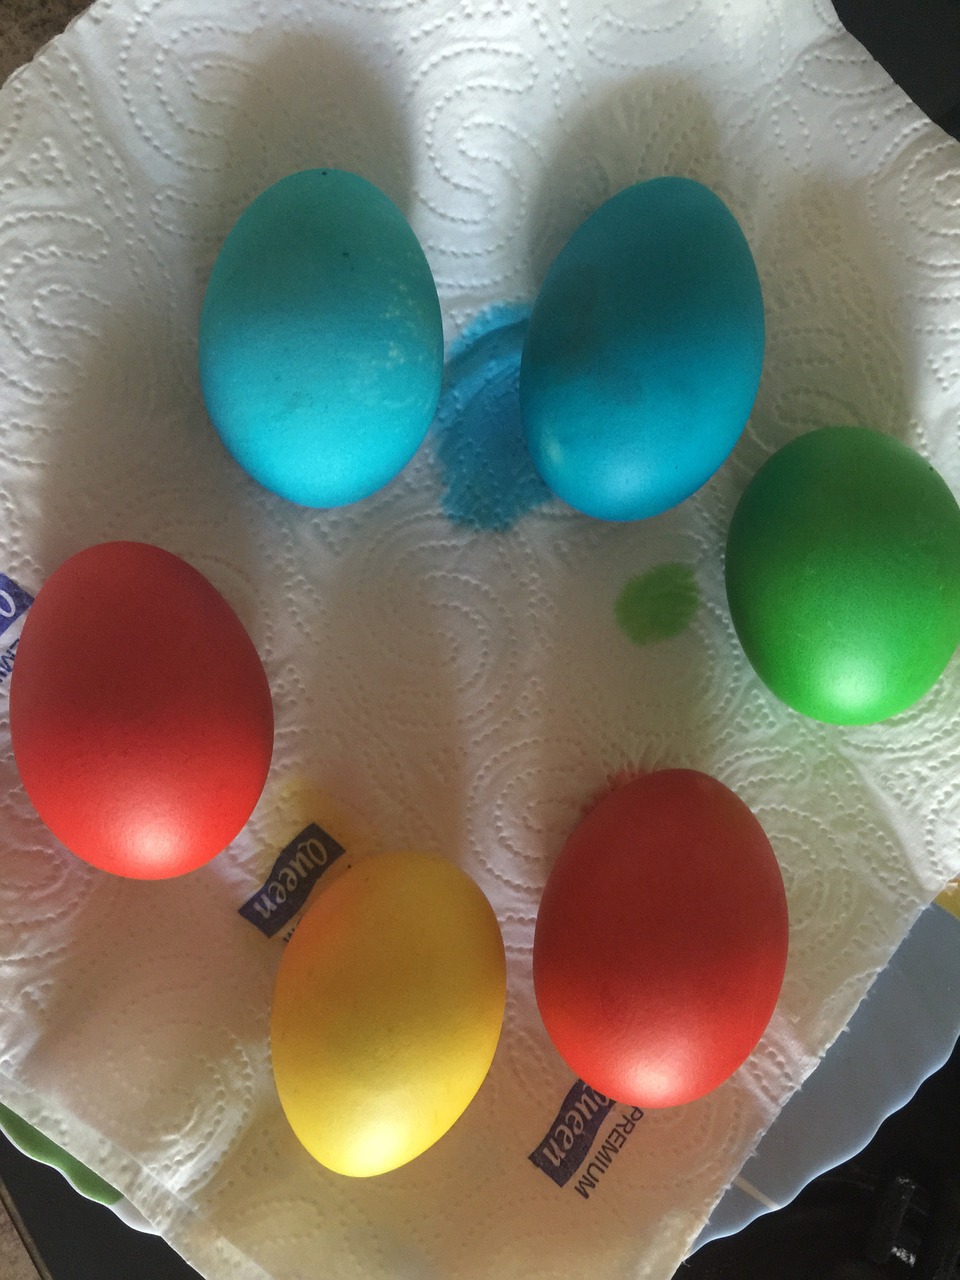 eggs easter ornaments free photo